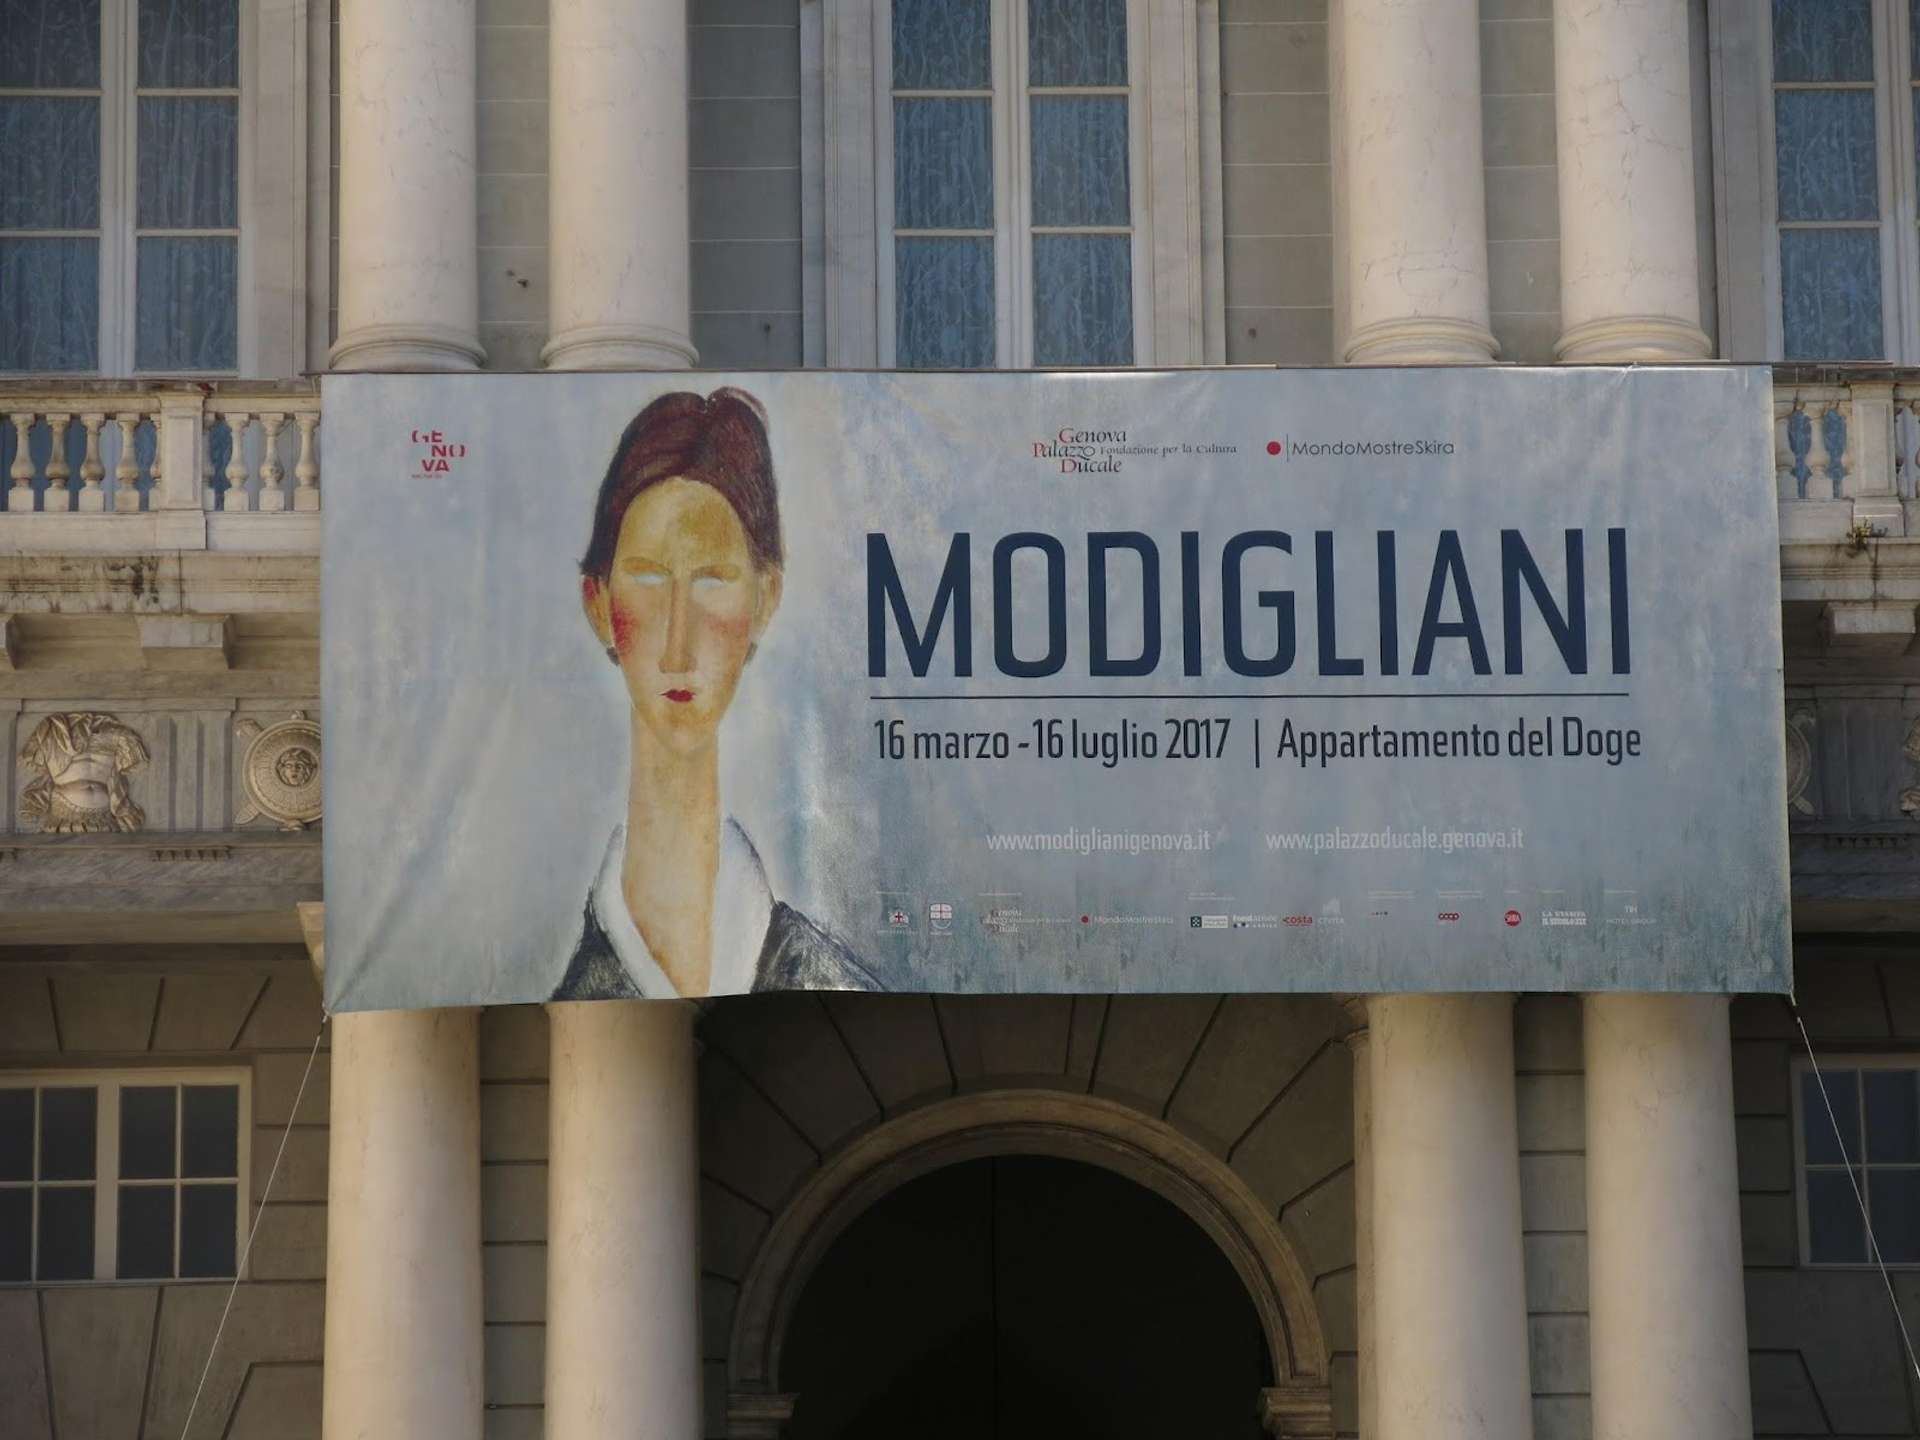 An image of the sign for the Modigliani exhibition at the Palazzo Ducale in Genoa.